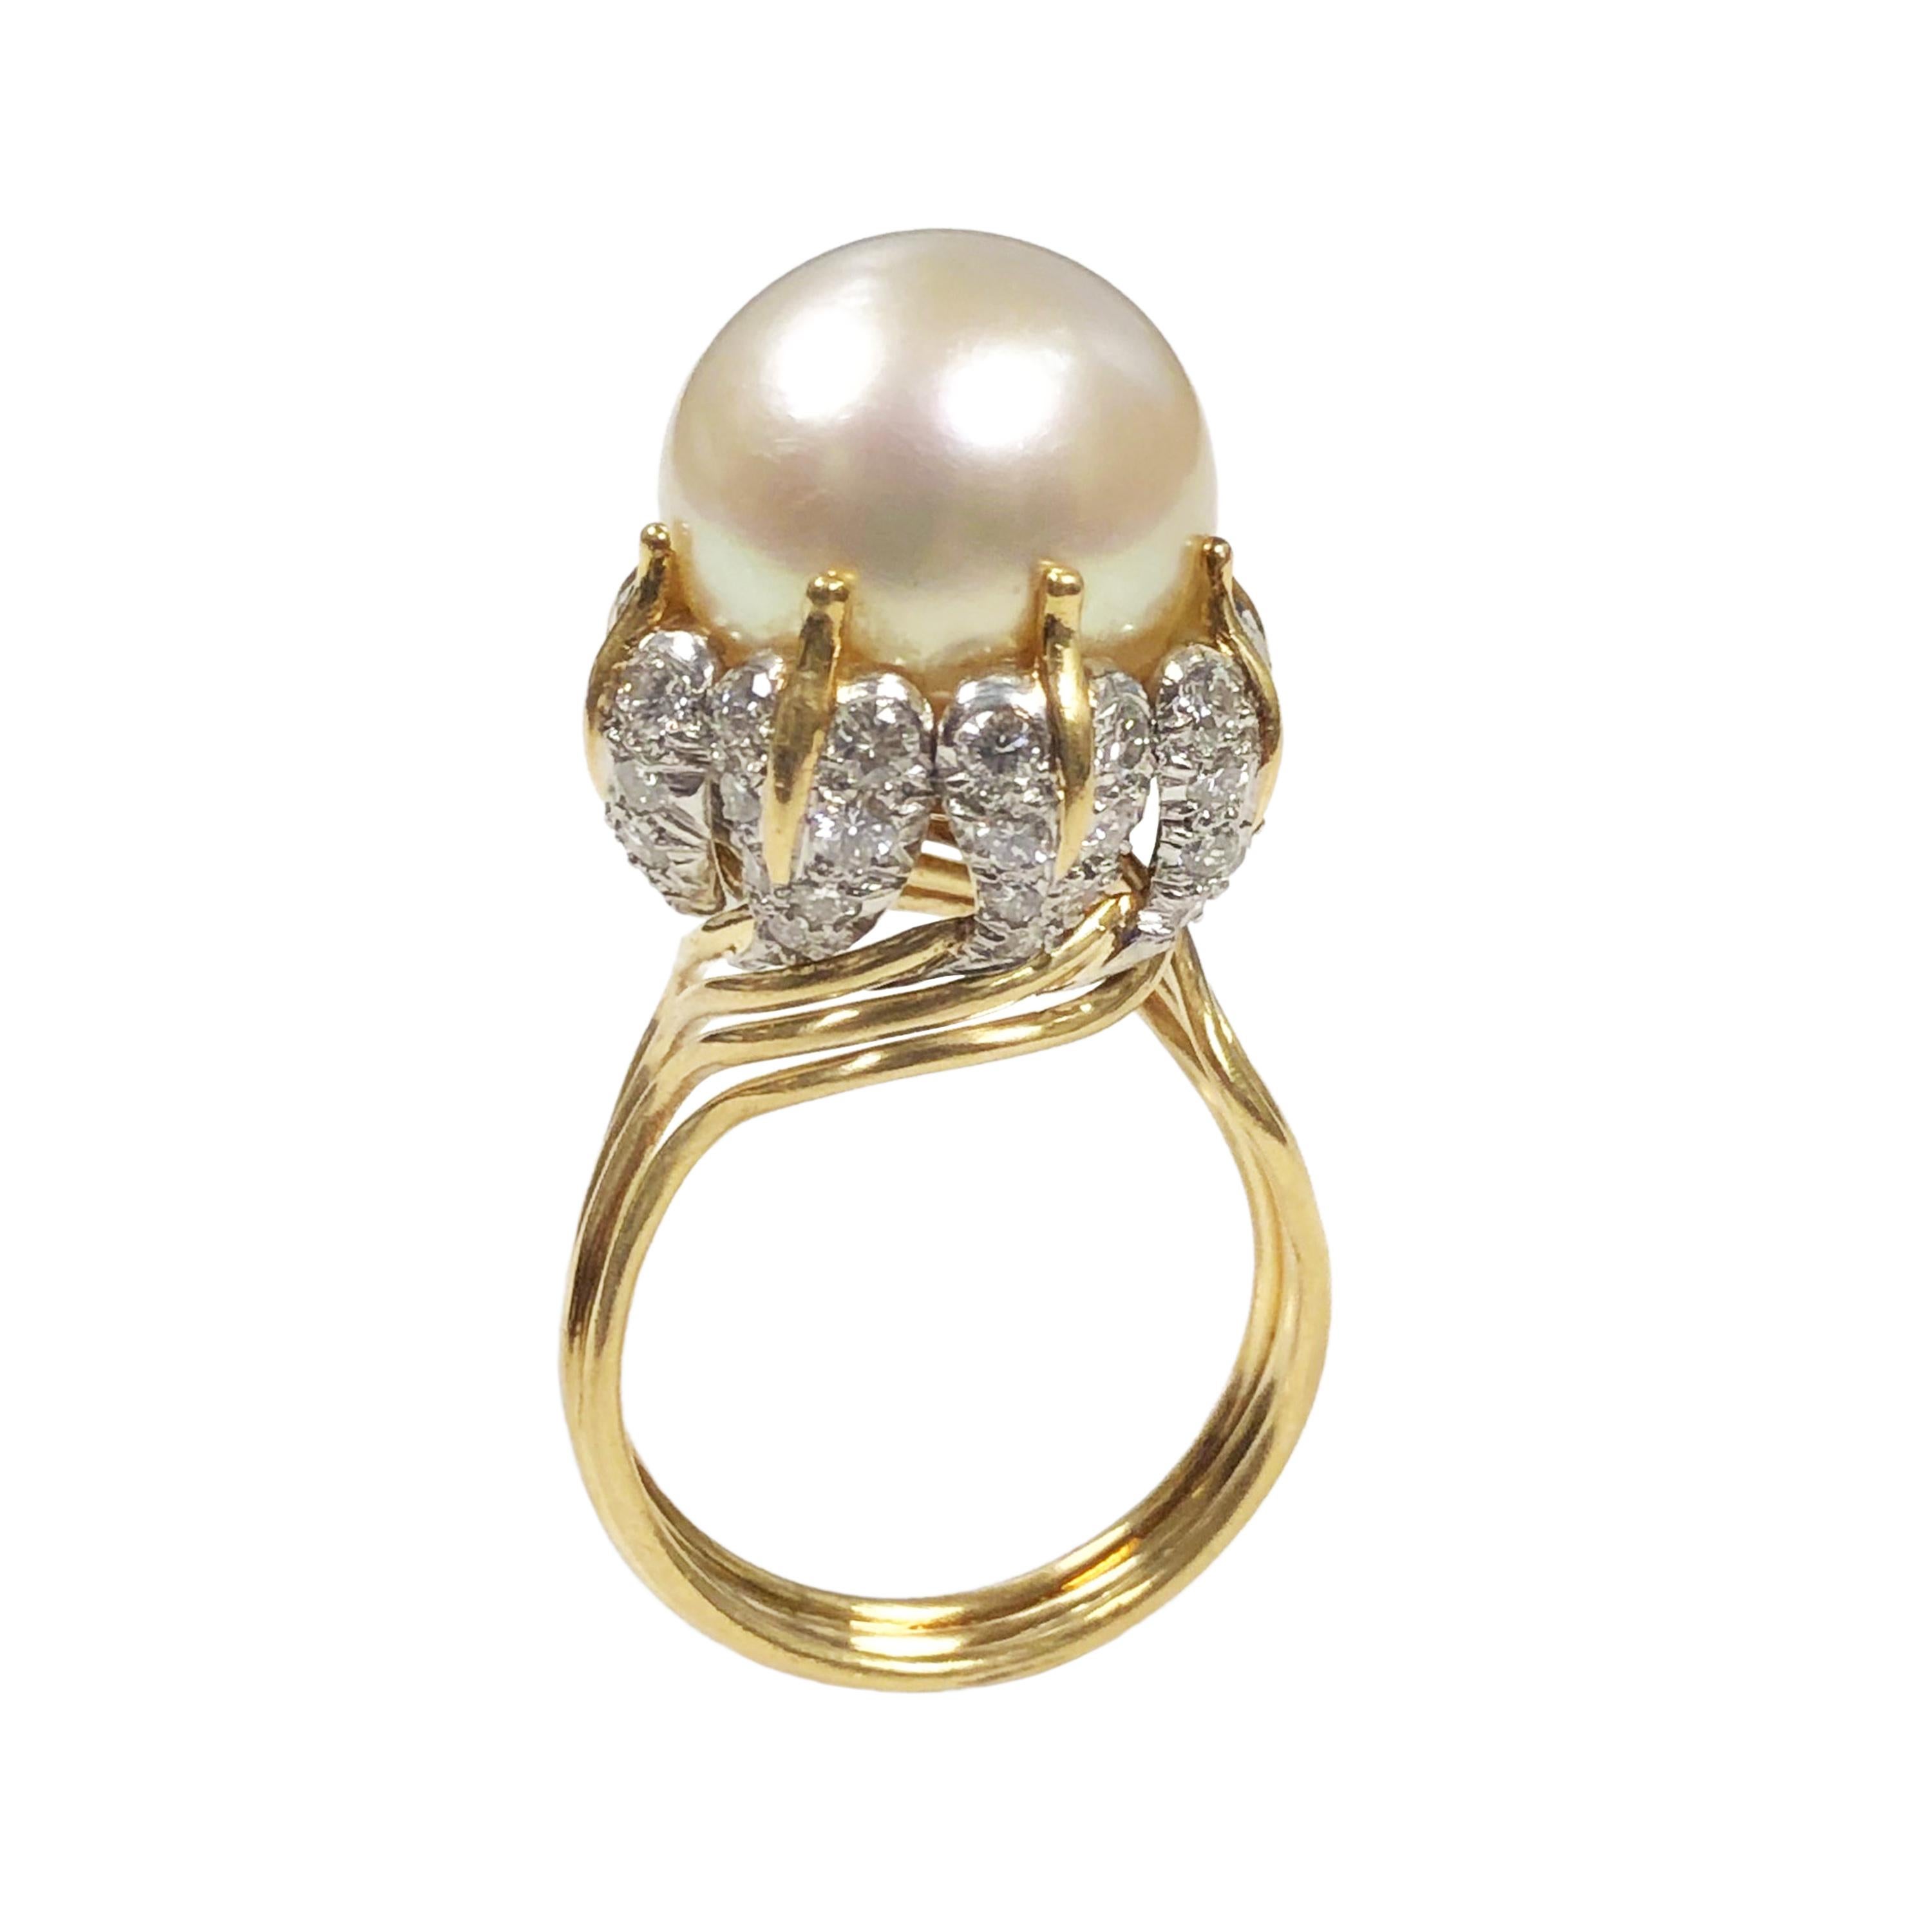 Circa 1990s Jean Schlumberger for Tiffany and Company 18K yellow Gold and Platinum Ring, Centrally set with a 13.5 MM south sea Pearl of very fine white color with a light pinkish luster. The top of the ring measures 5/8 inch in diameter.  Diamonds